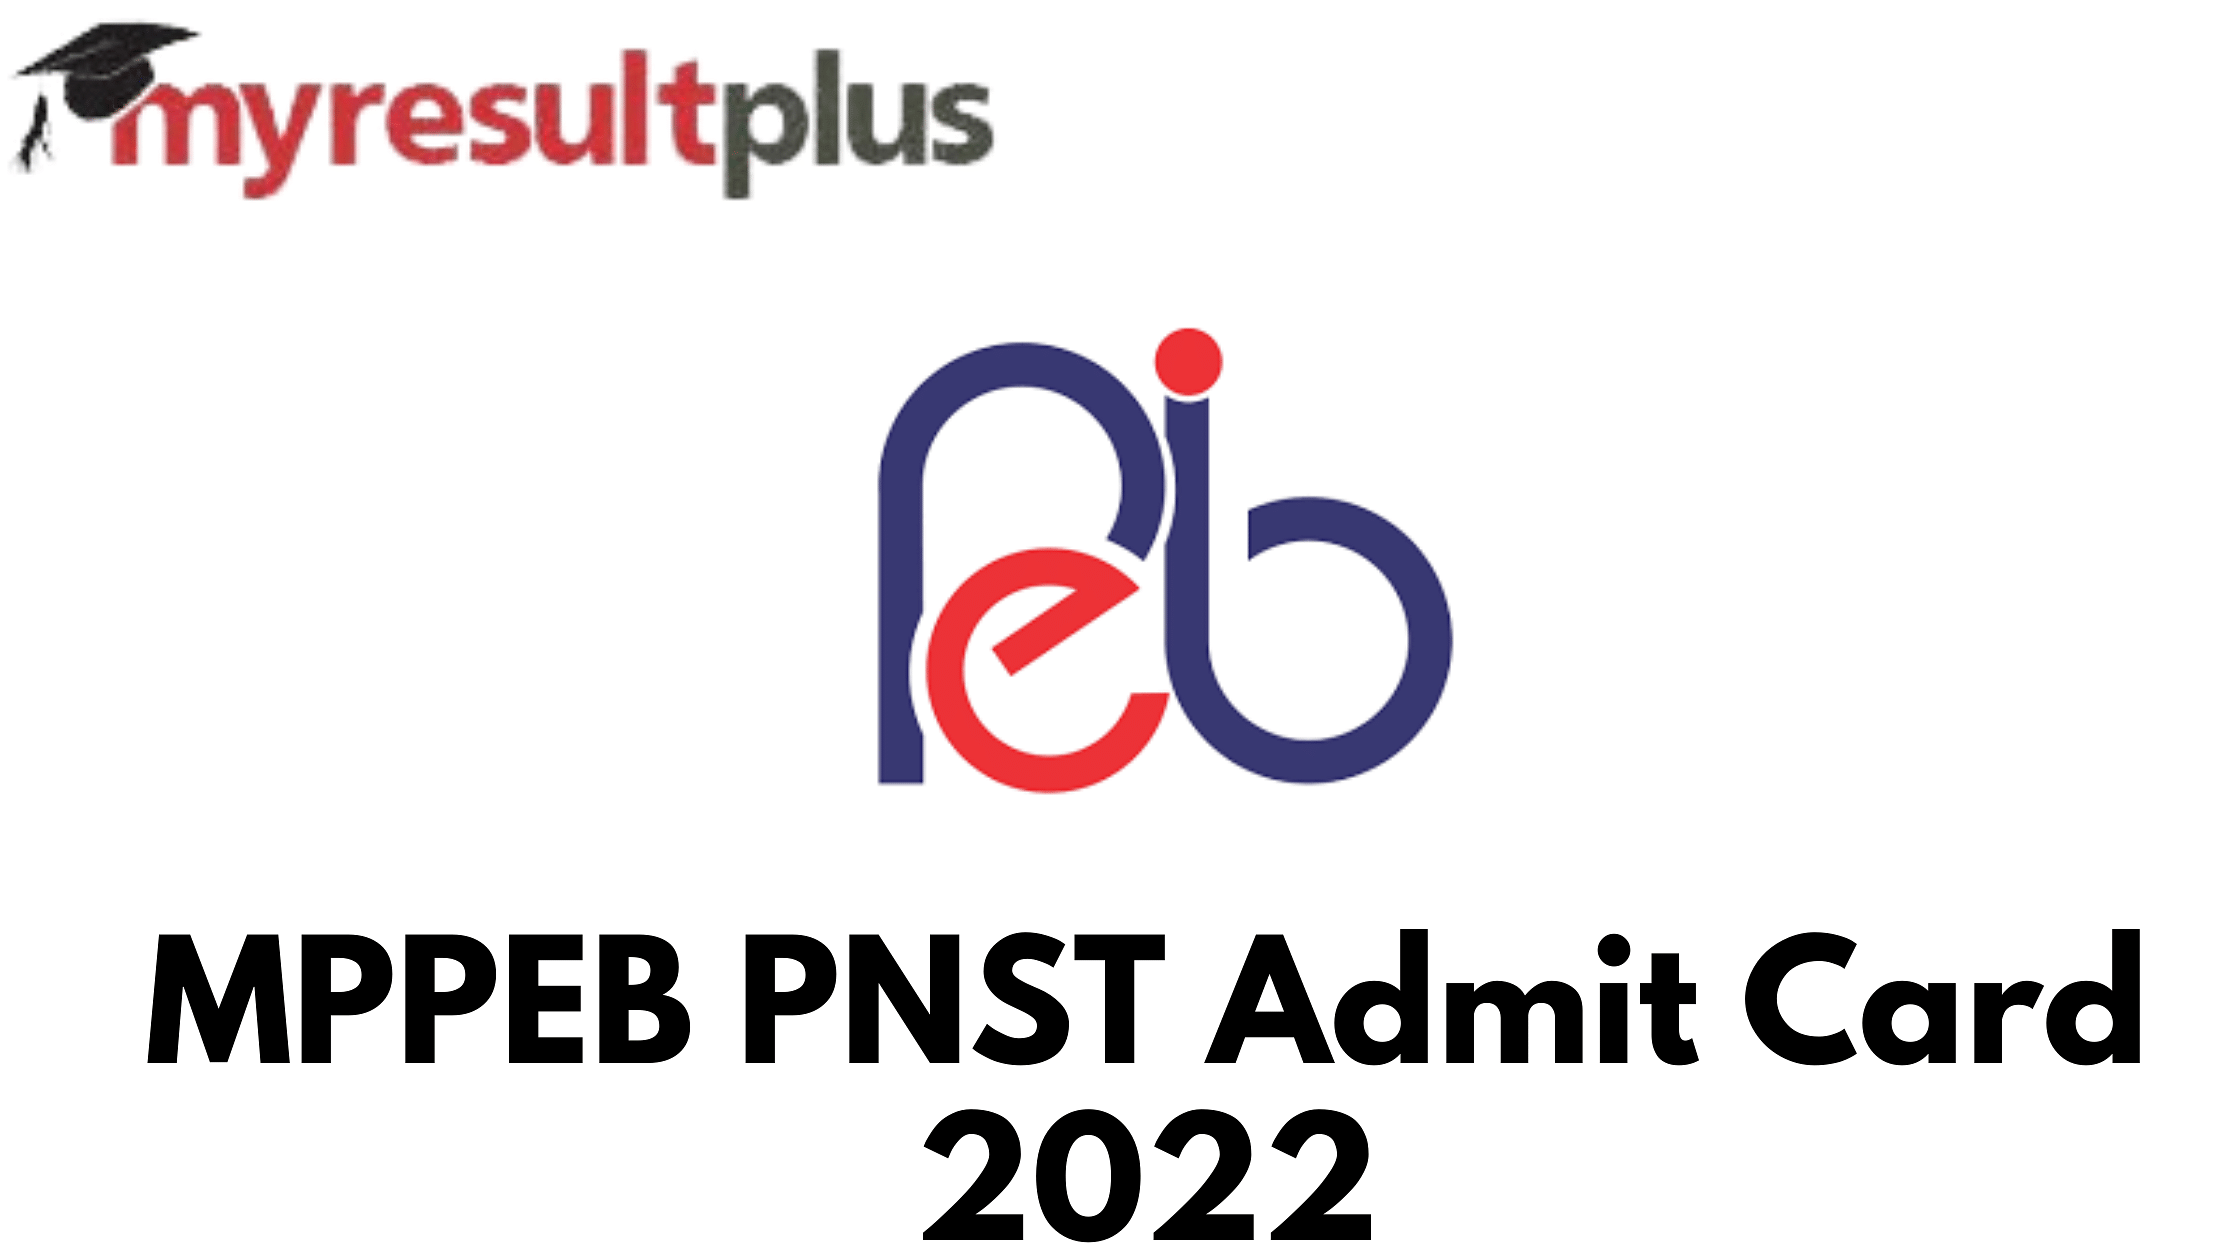 MPPEB PNST Admit Card 2022 Out, Here's How to Download